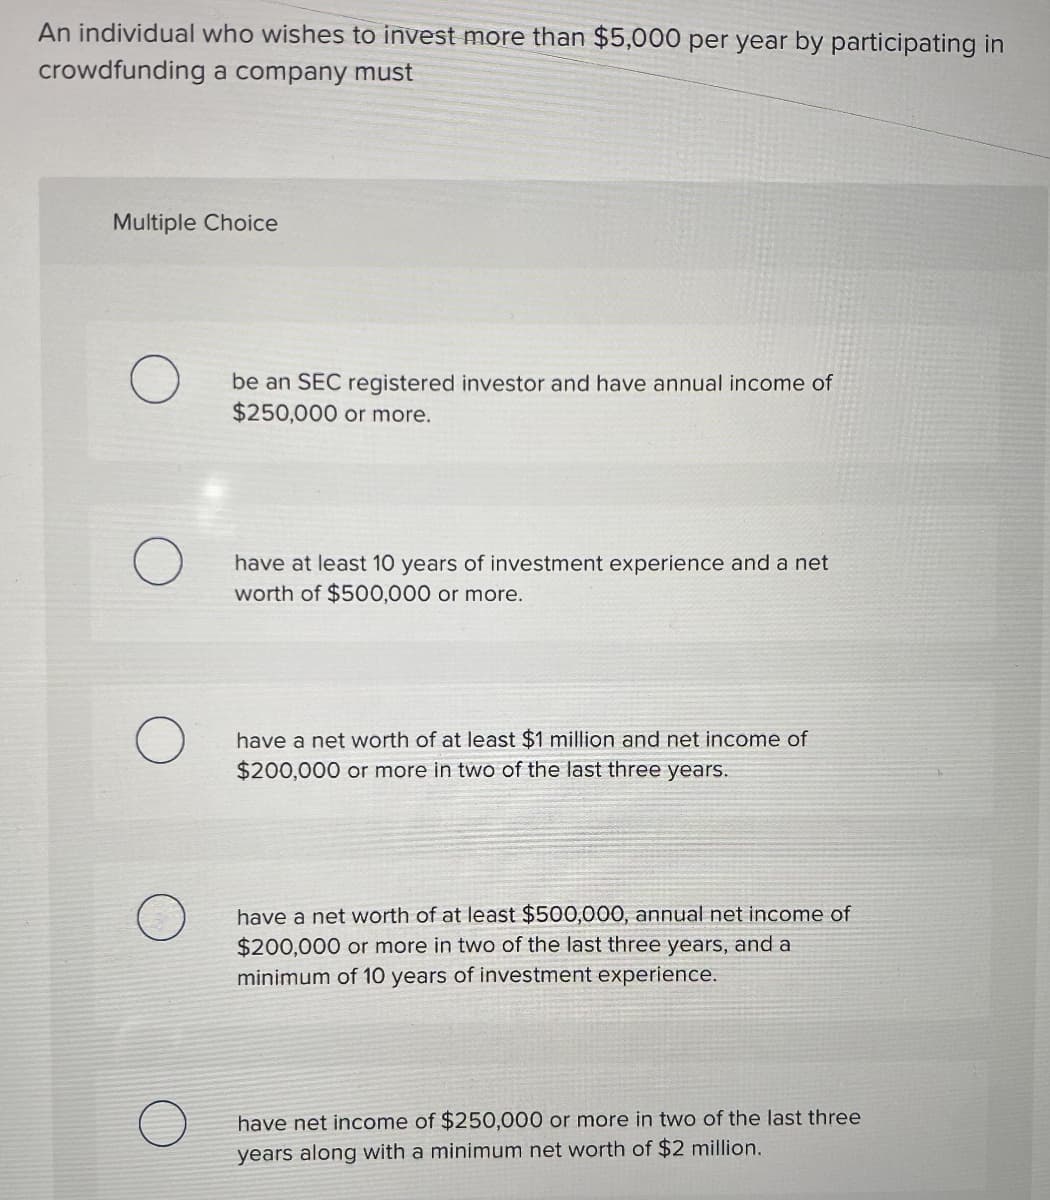 An individual who wishes to invest more than $5,000 per year by participating in
crowdfunding a company must
Multiple Choice
be an SEC registered investor and have annual income of
$250,000 or more.
have at least 10 years of investment experience and a net
worth of $500,000 or more.
have a net worth of at least $1 million and net income of
$200,000 or more in two of the last three years.
have a net worth of at least $500,000, annual net income of
$200,000 or more in two of the last three years, and a
minimum of 10 years of investment experience.
have net income of $250,000 or more in two of the last three
years along with a minimum net worth of $2 million.